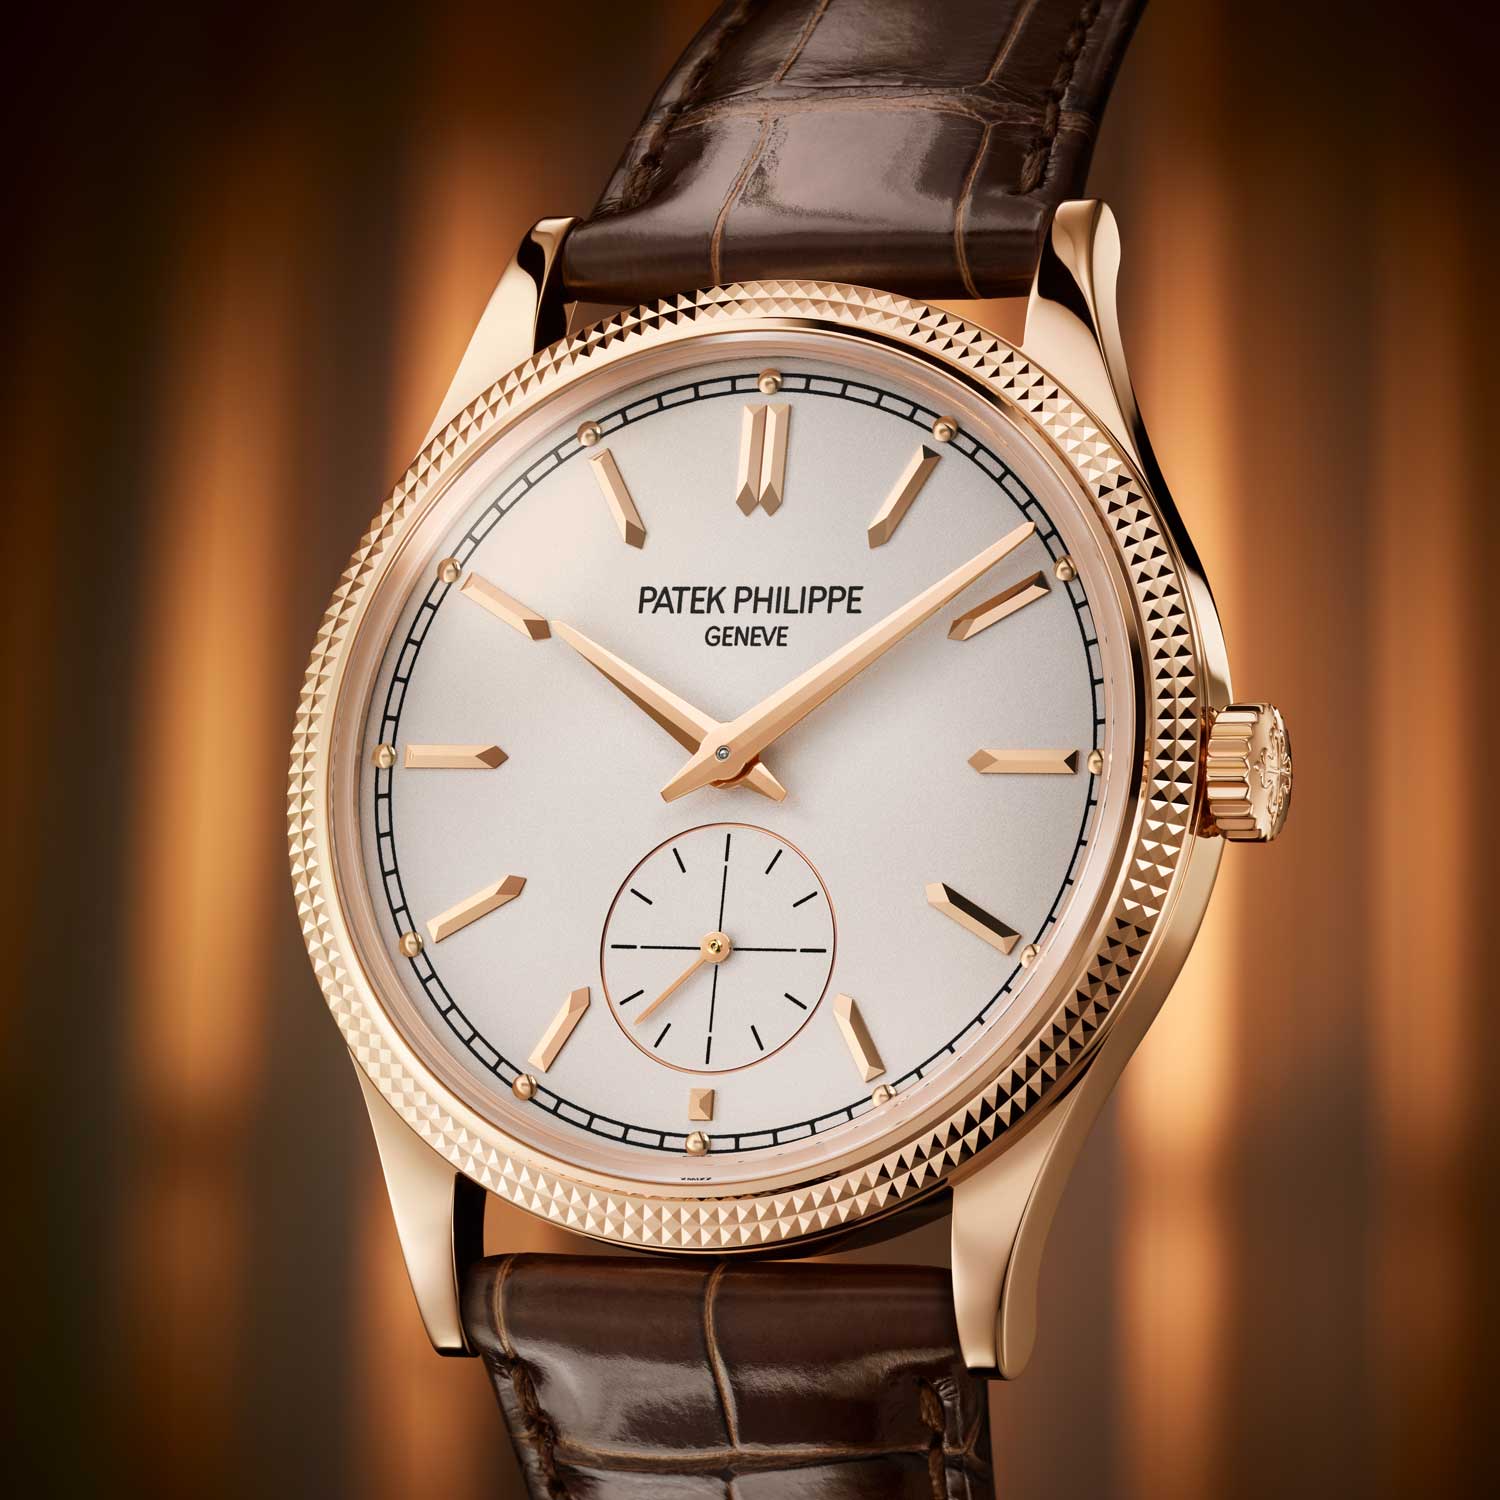 The 6119 has a its bezel guilloched with hobnail pattern, hence the name "Clous de Paris"